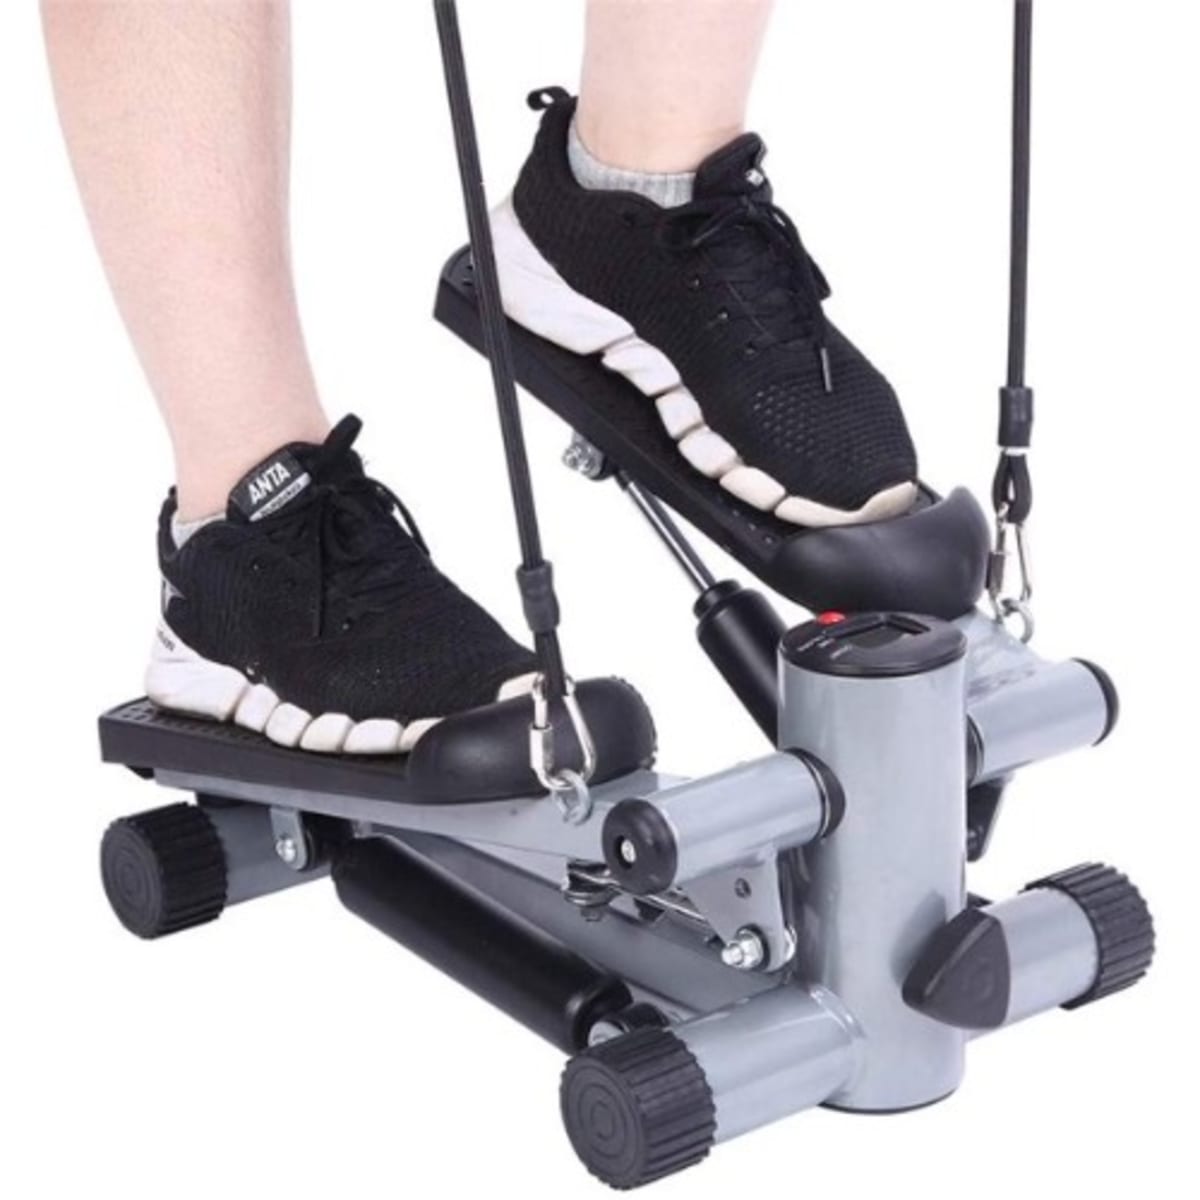 Stepper Machine Fitness Device and Exercise Kit